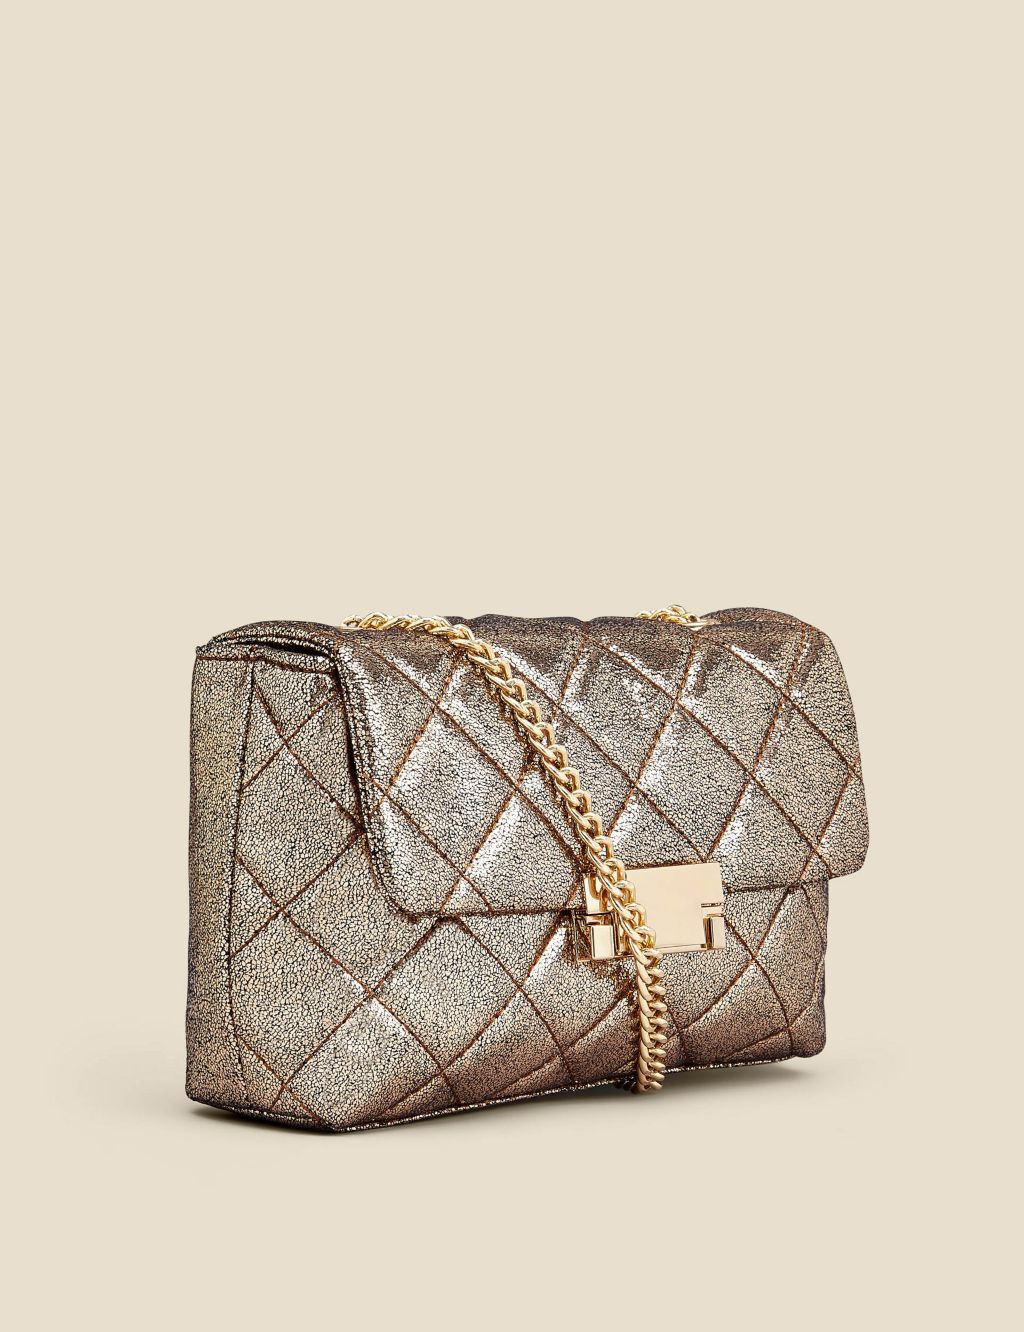 Quilted Metallic Chain Strap Cross Body Bag image 3